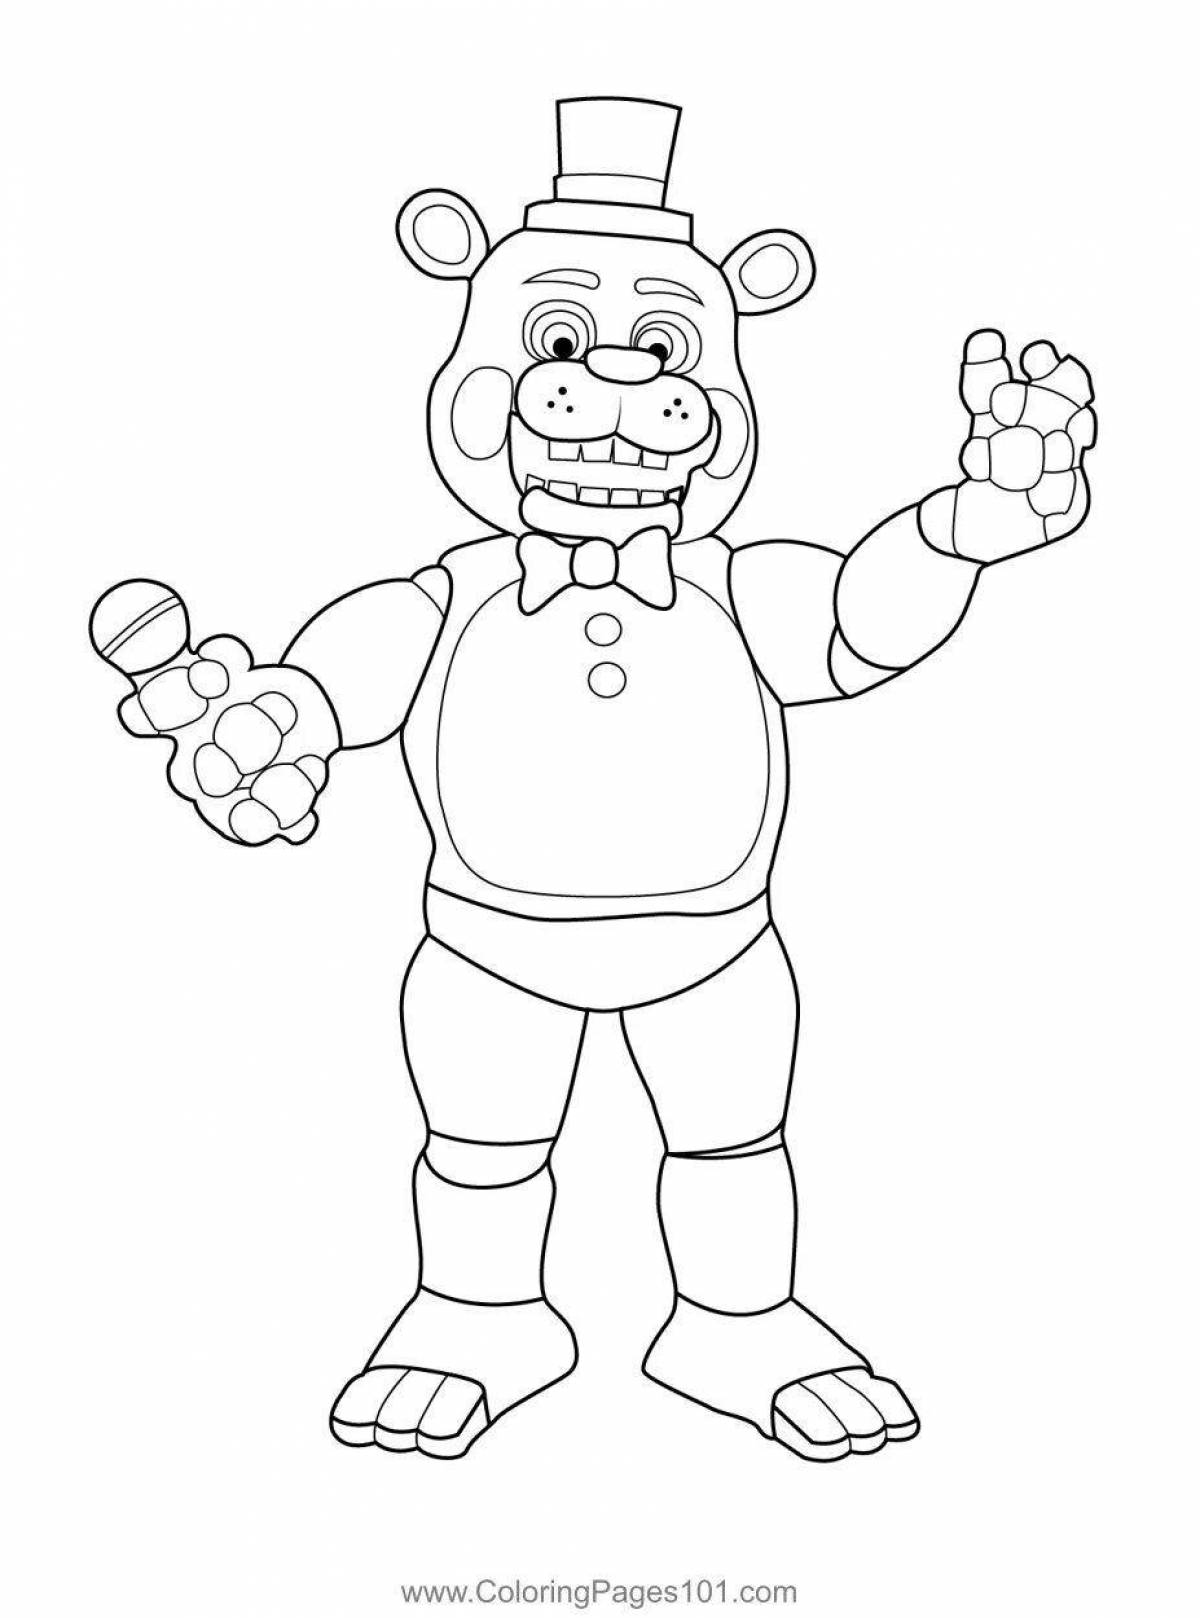 Coloring live freddy